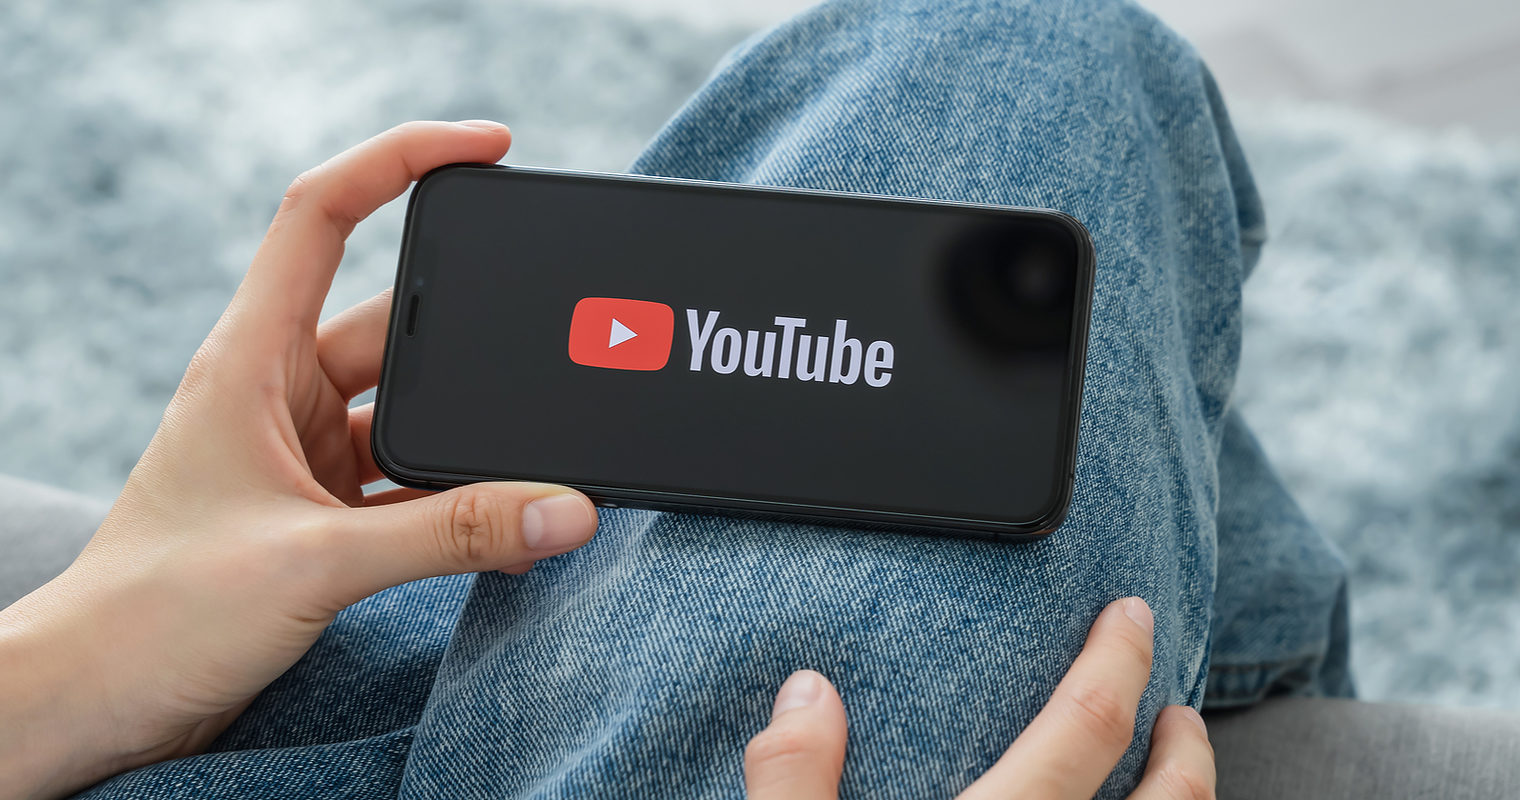 YouTube Used By More US Adults Than Any Other Social Network